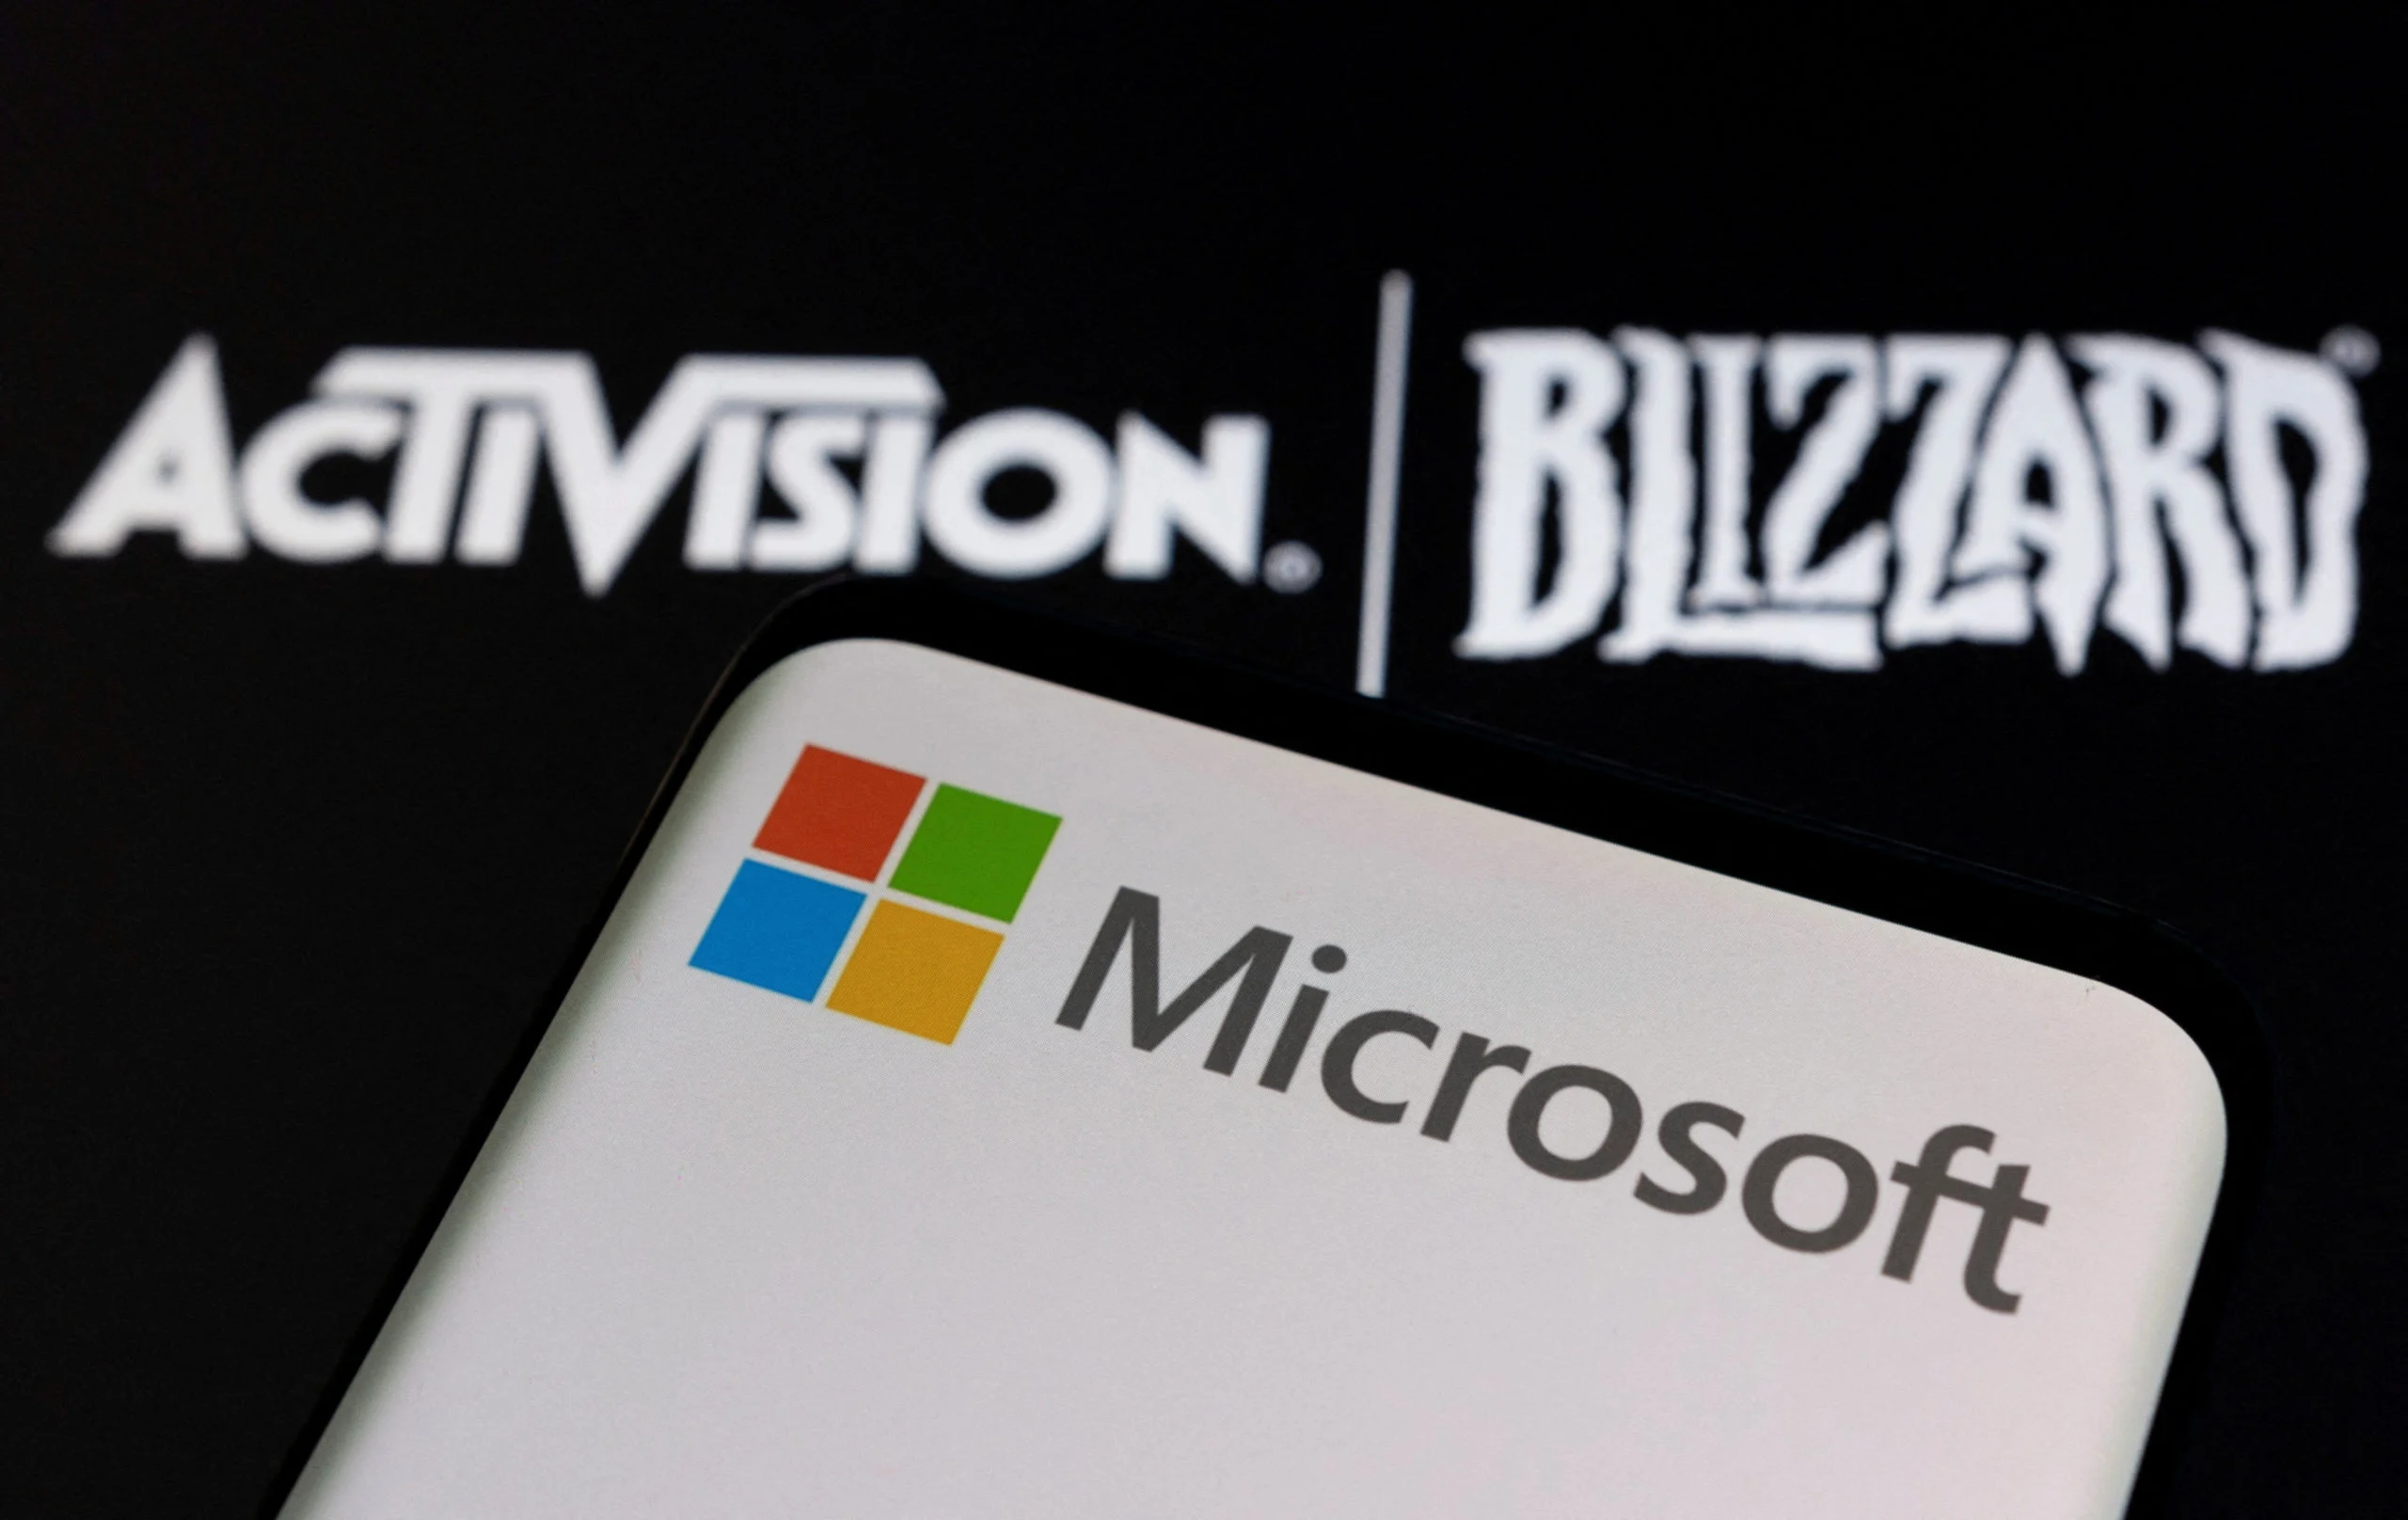 Microsoft gets more Activision merger allies after agreements with Nvidia, Nintendo